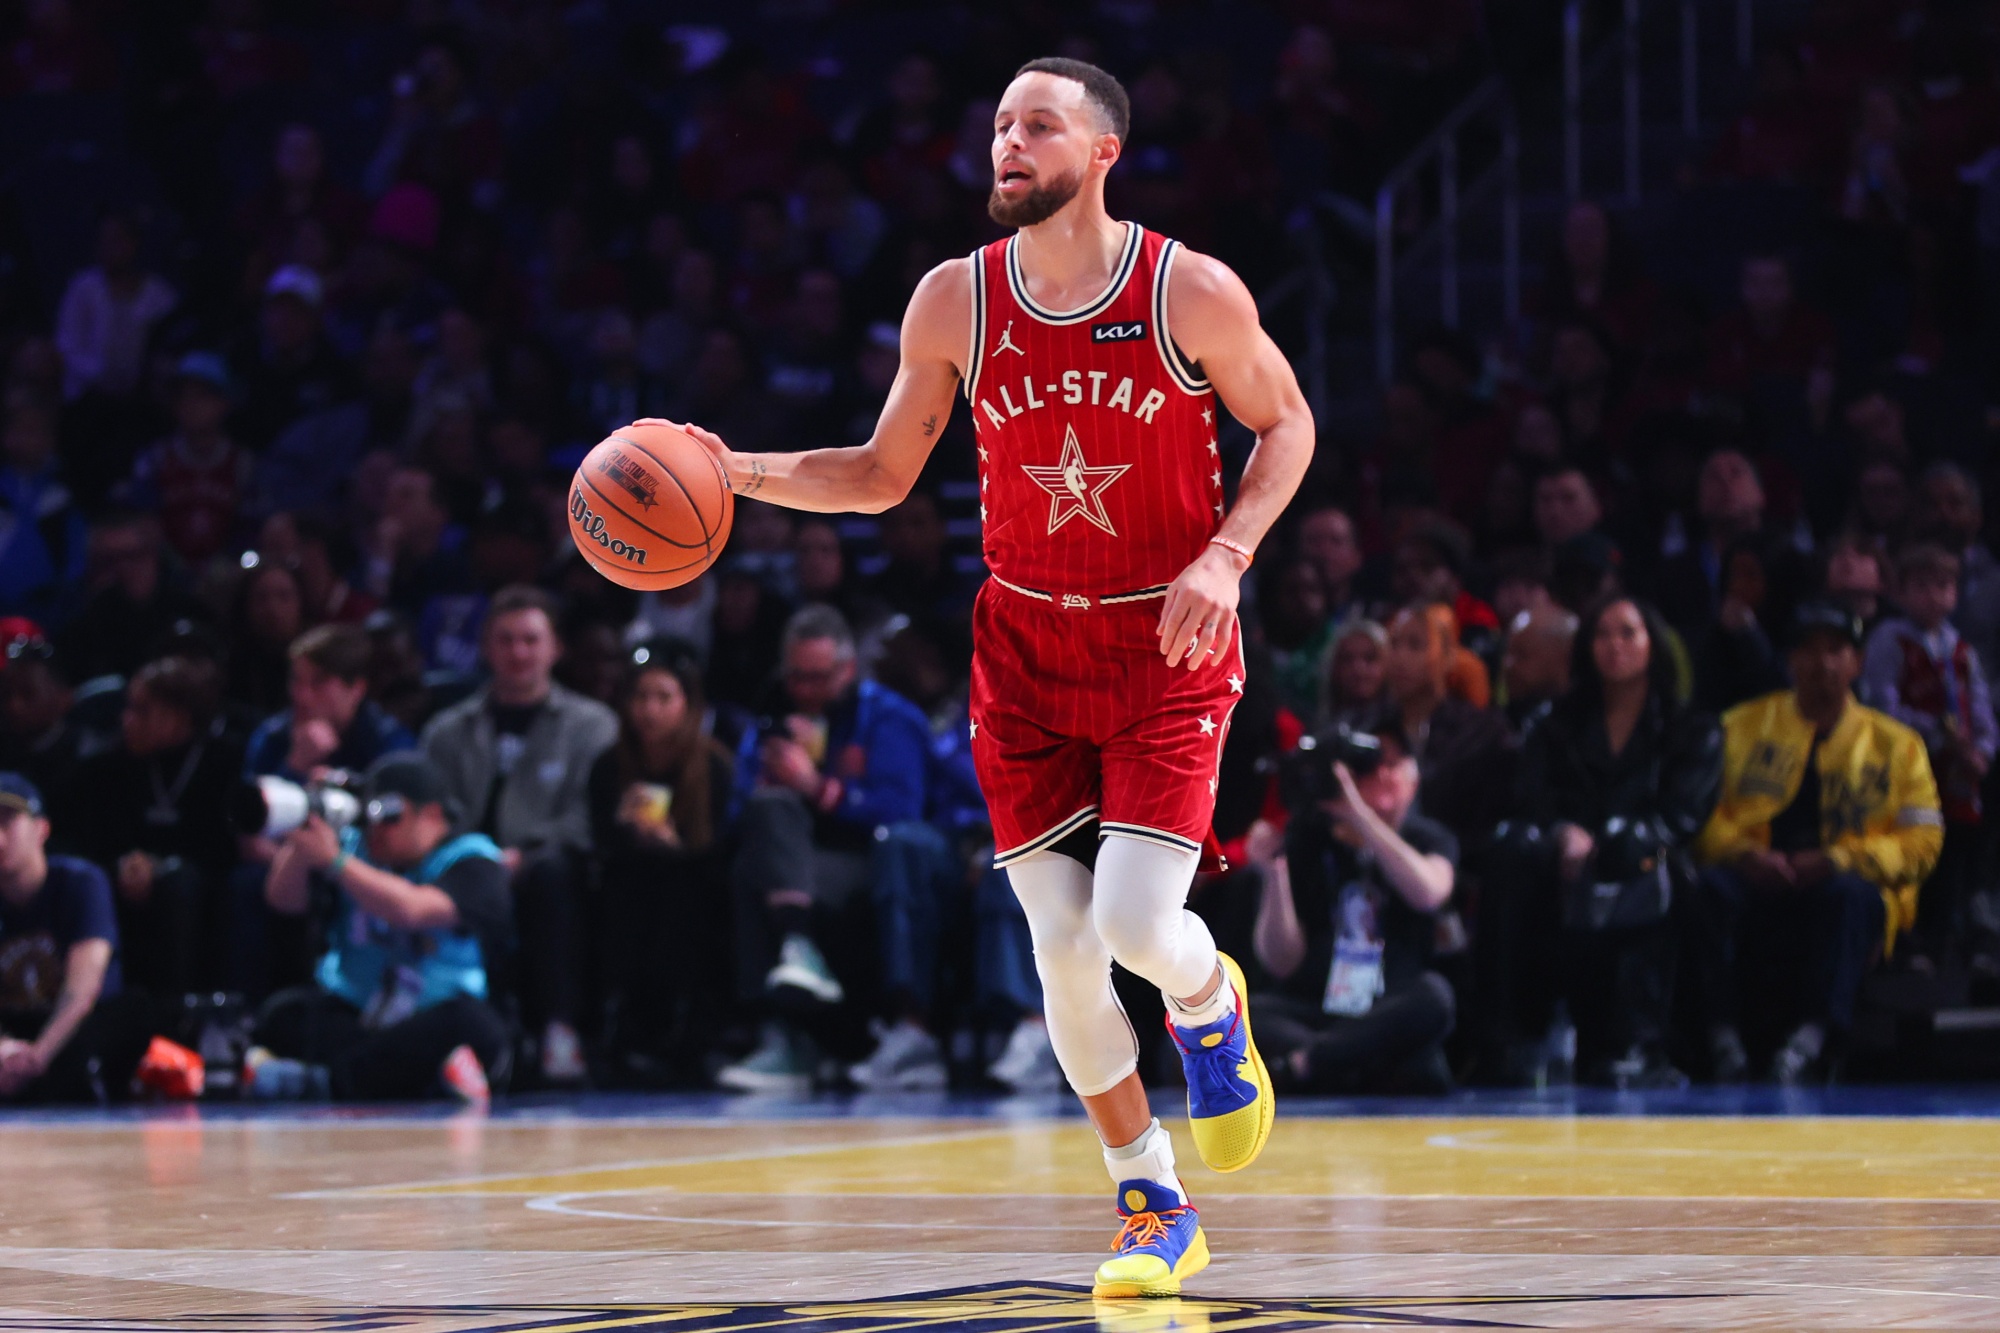 Steph Curry Shoes, Casual Wear Brand Aim to Boost Under Armour (UAA) -  Bloomberg